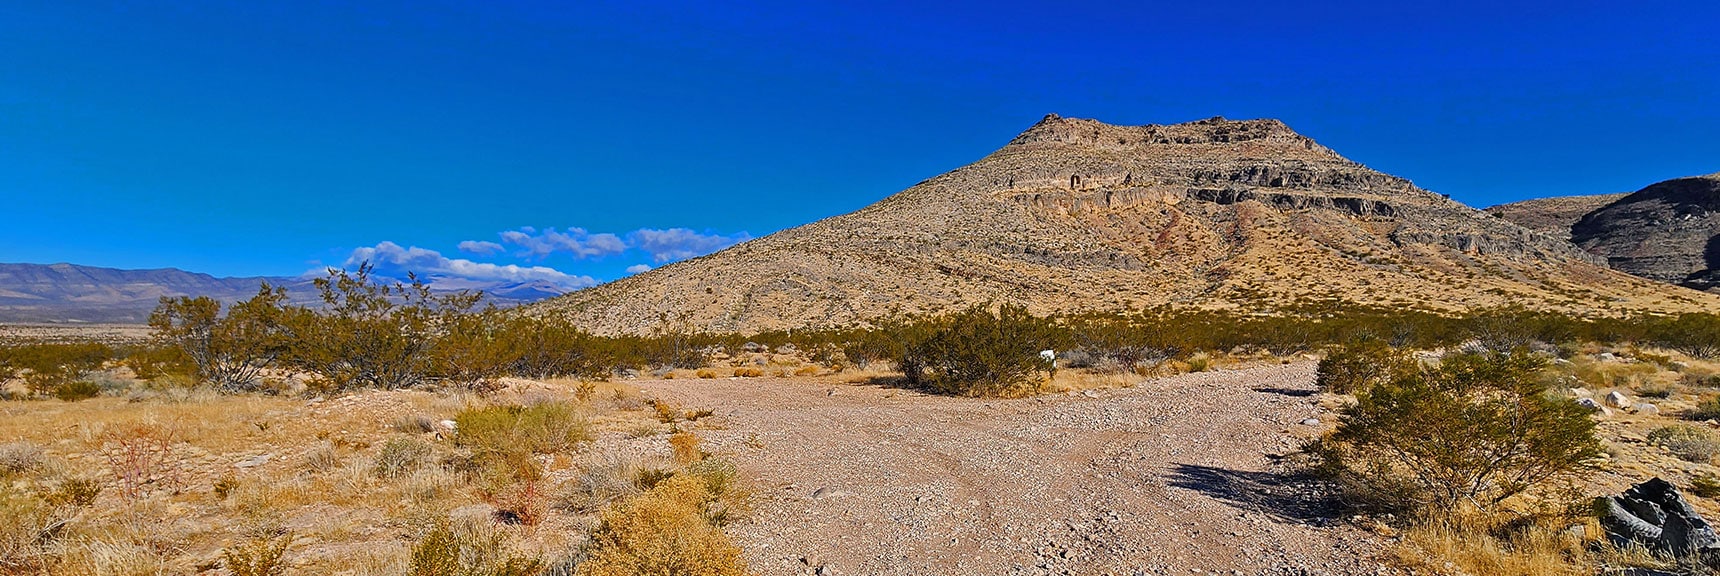 Road Split to 2nd Canyon: Mule Spring Canyon (right split). Will Take Left Split Today. | Landmark Bluff Summit | Lovell Canyon, Nevada